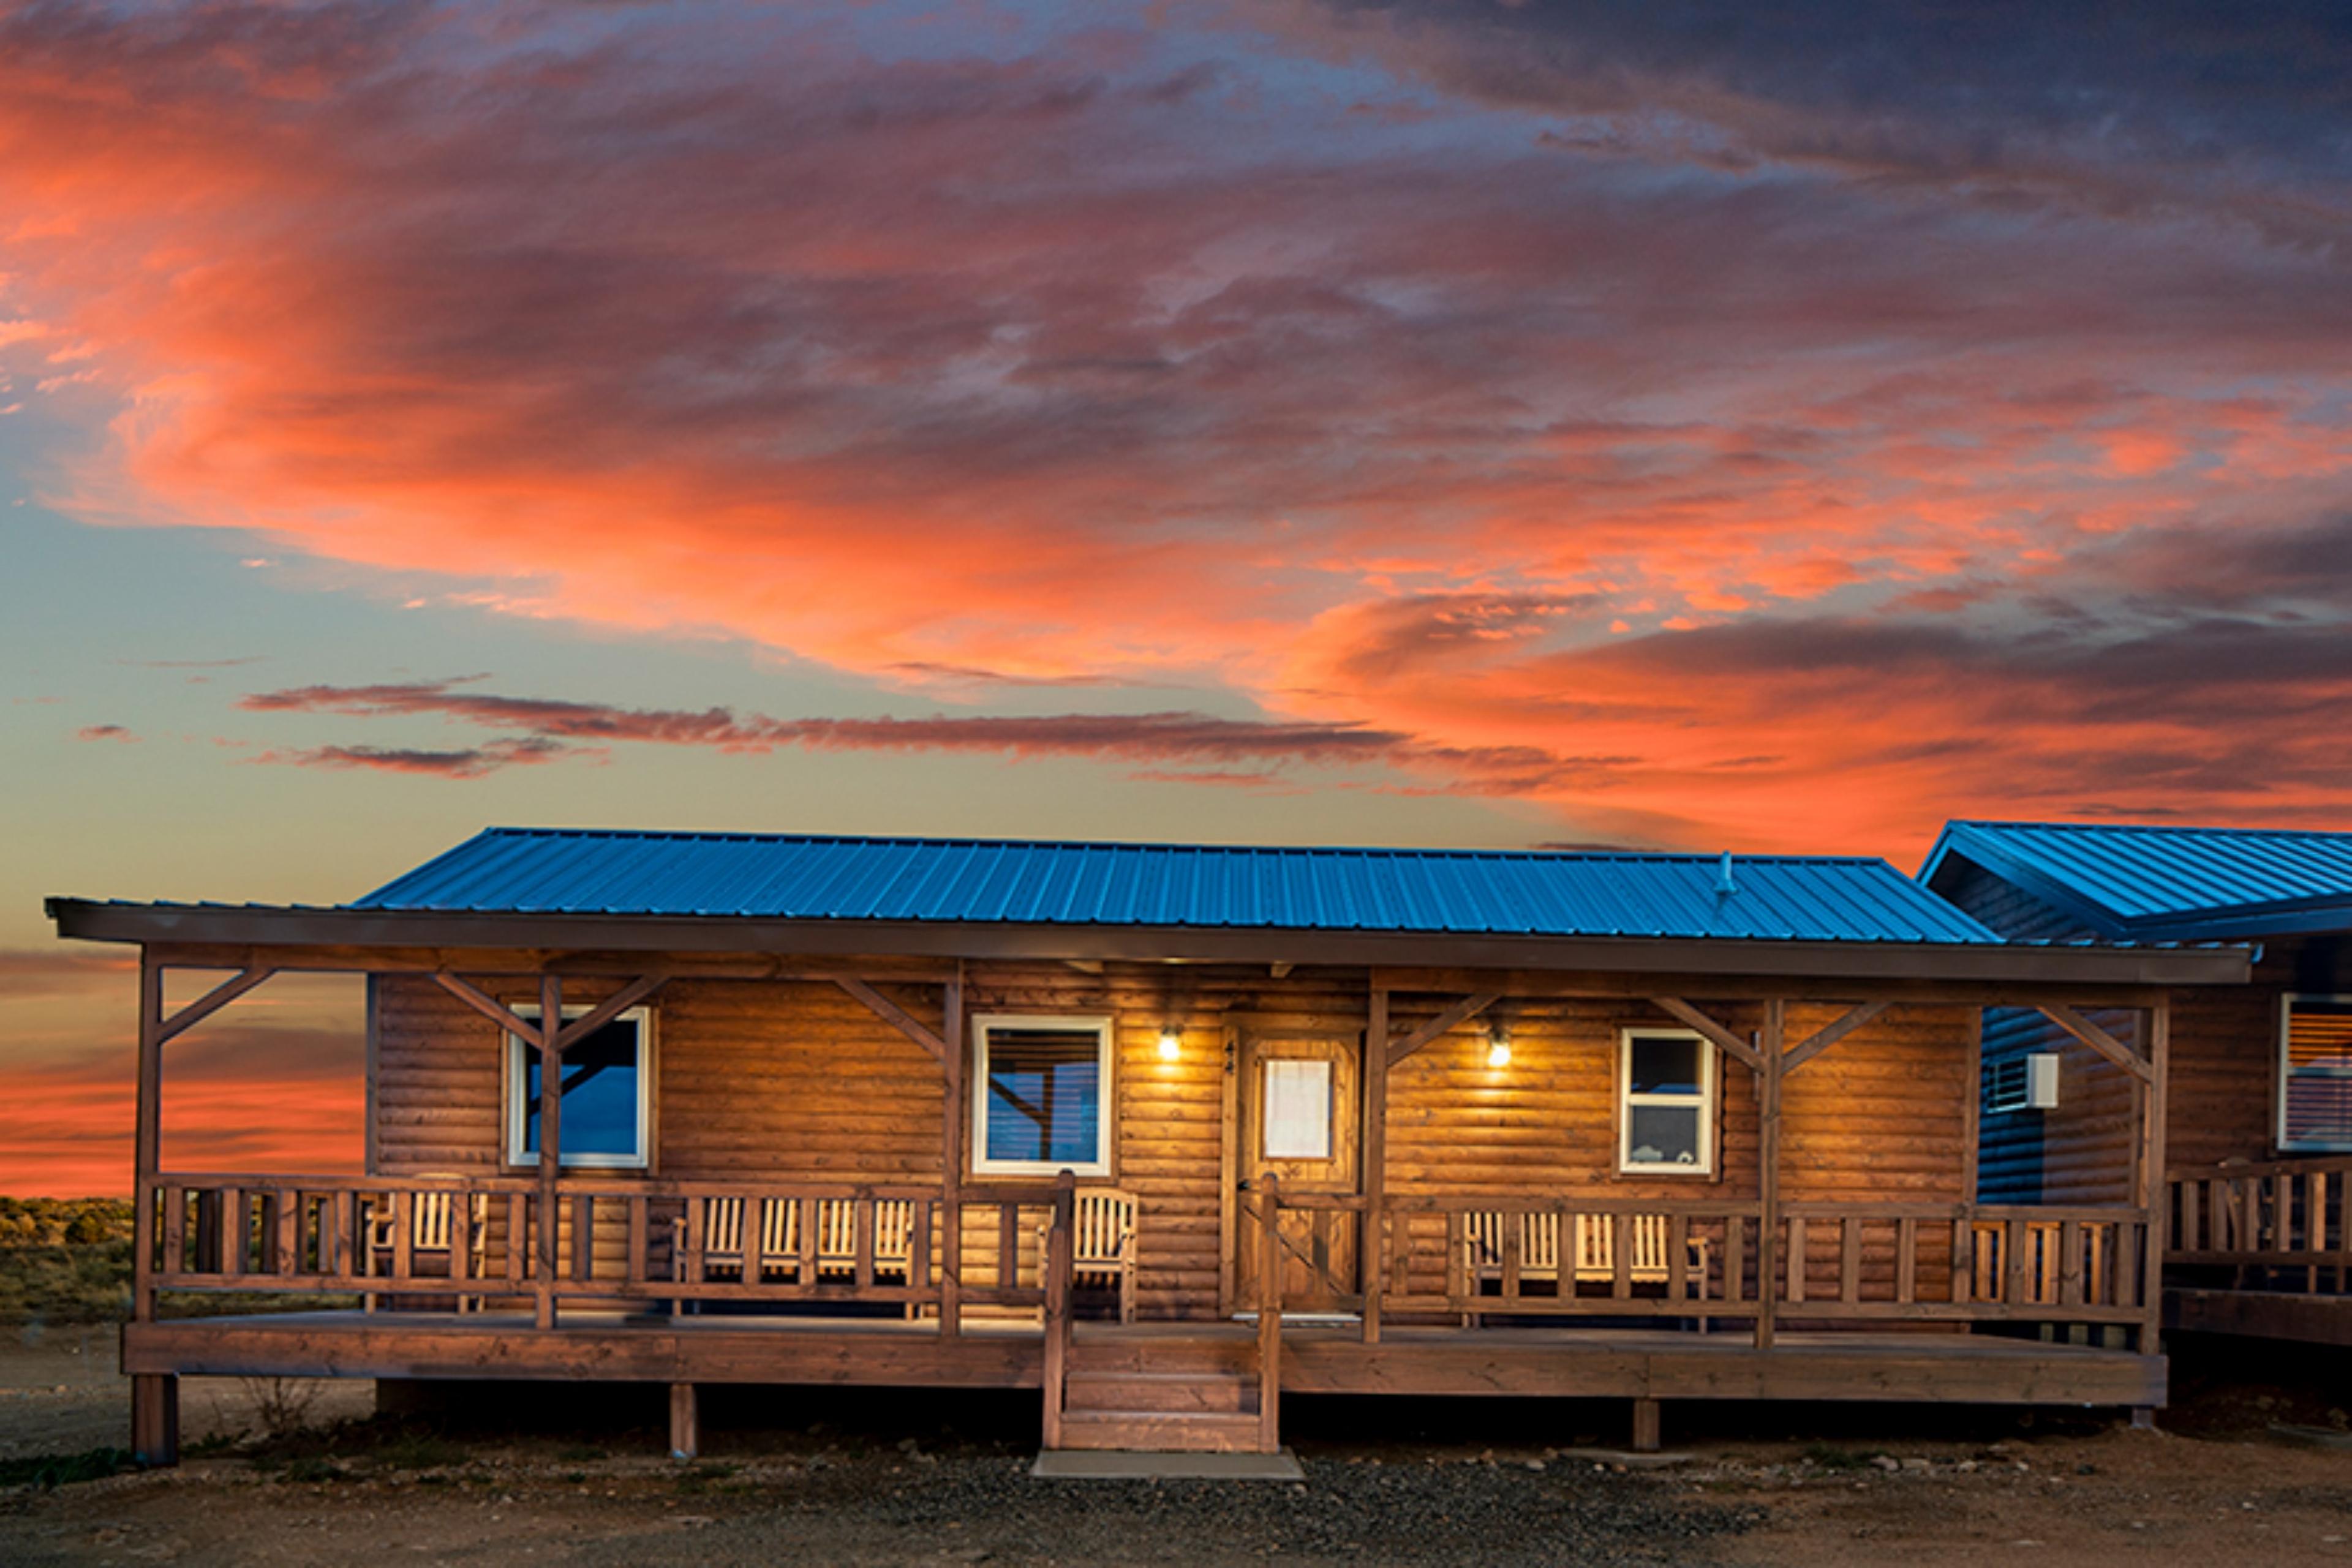 Cabins at Grand Canyon West